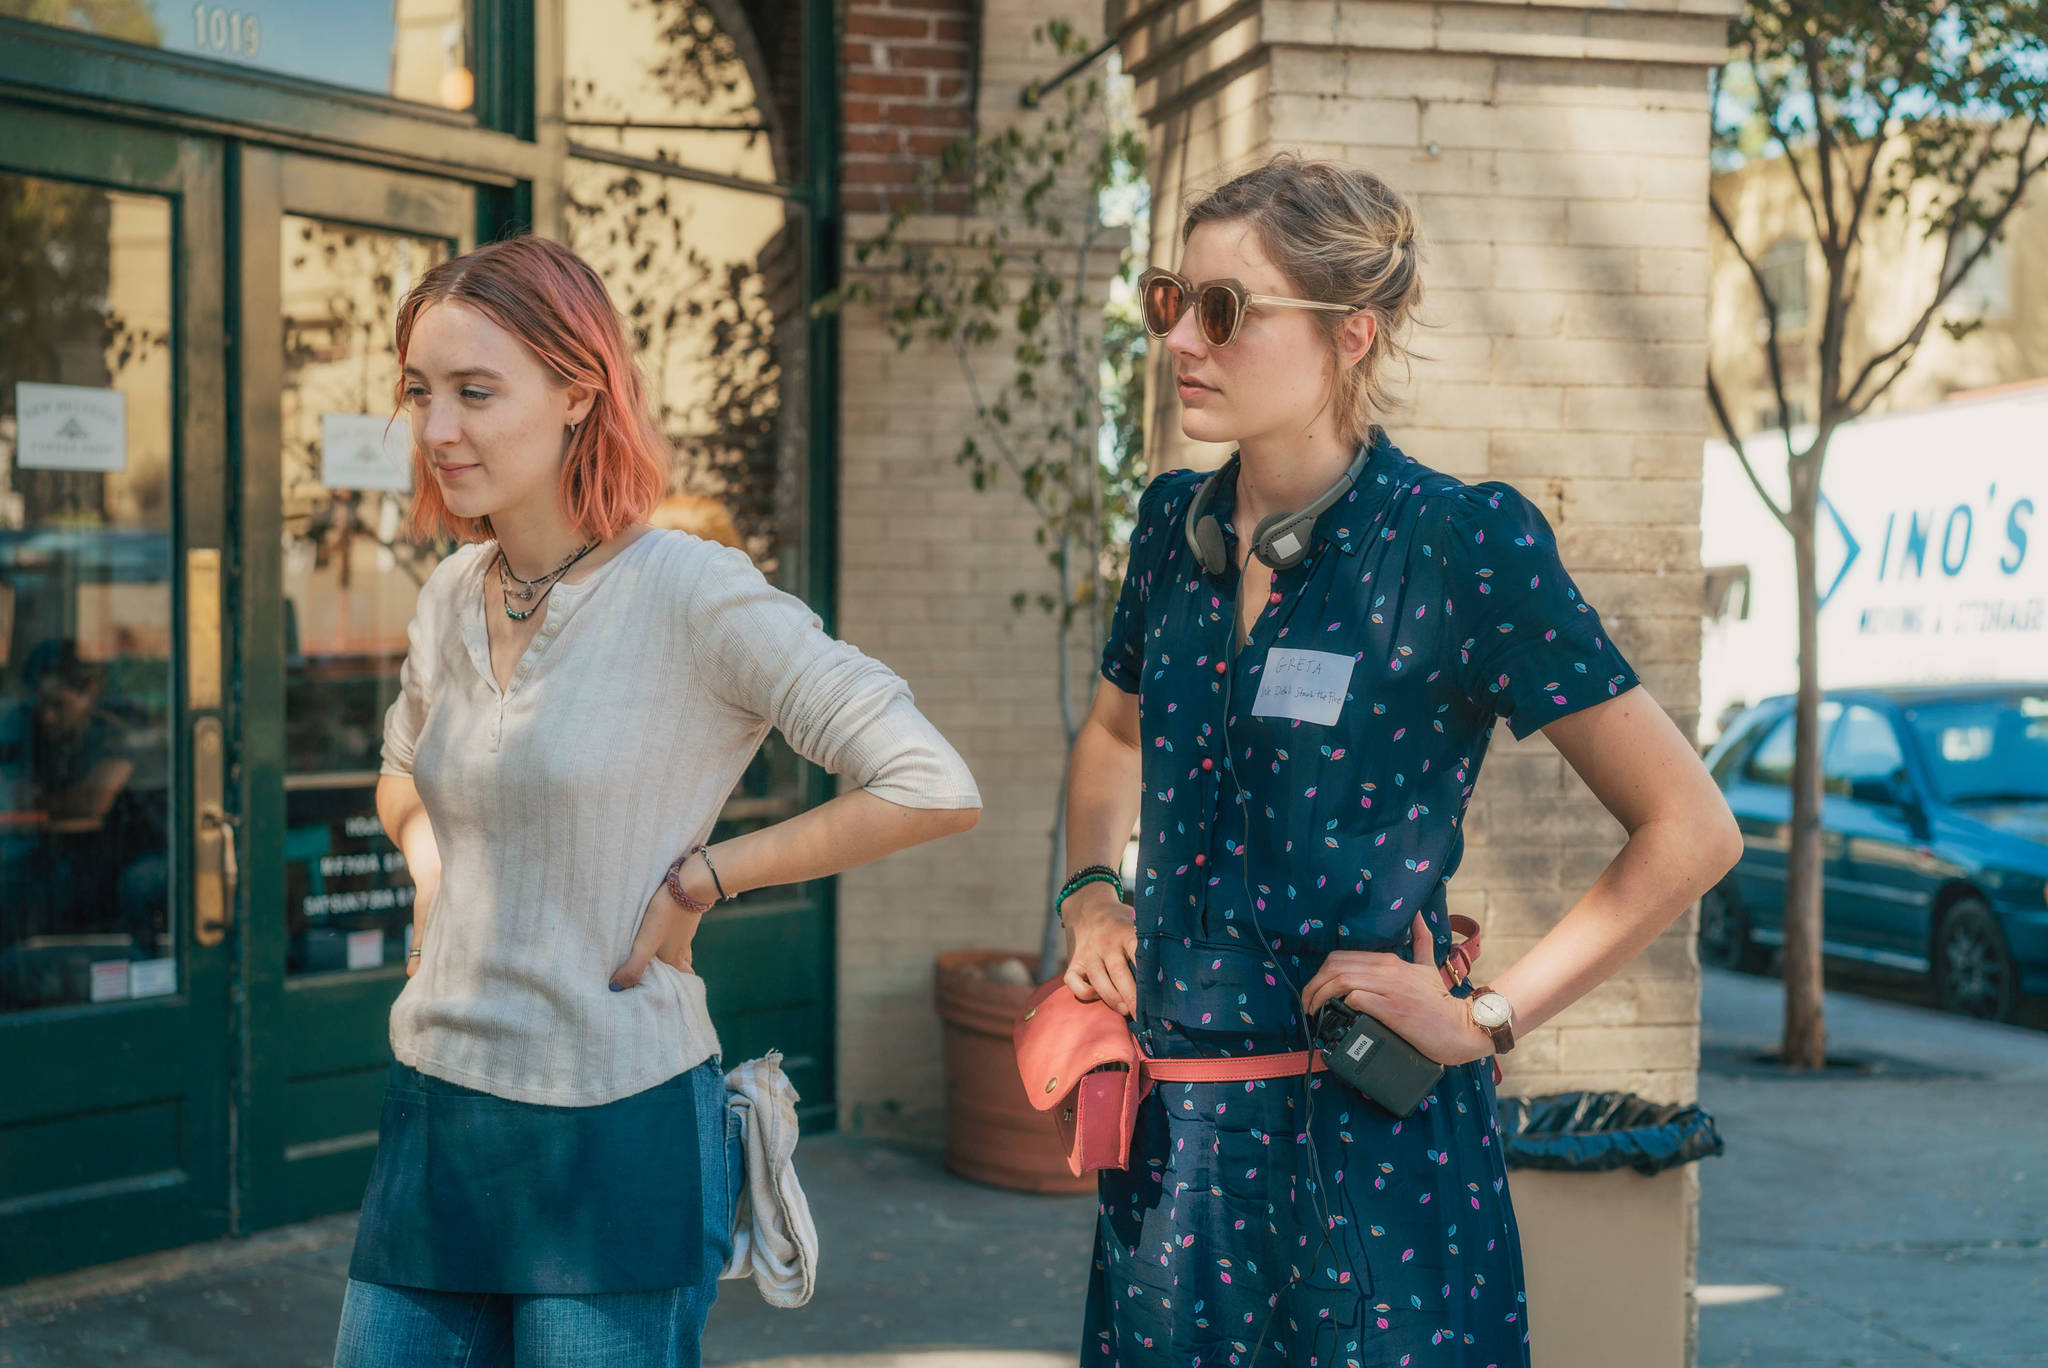 This image released by A24 Films shows director Greta Gerwig, right, and Saoirse Ronan on the set of “Lady Bird.” (Merie Wallace/A24 via AP)